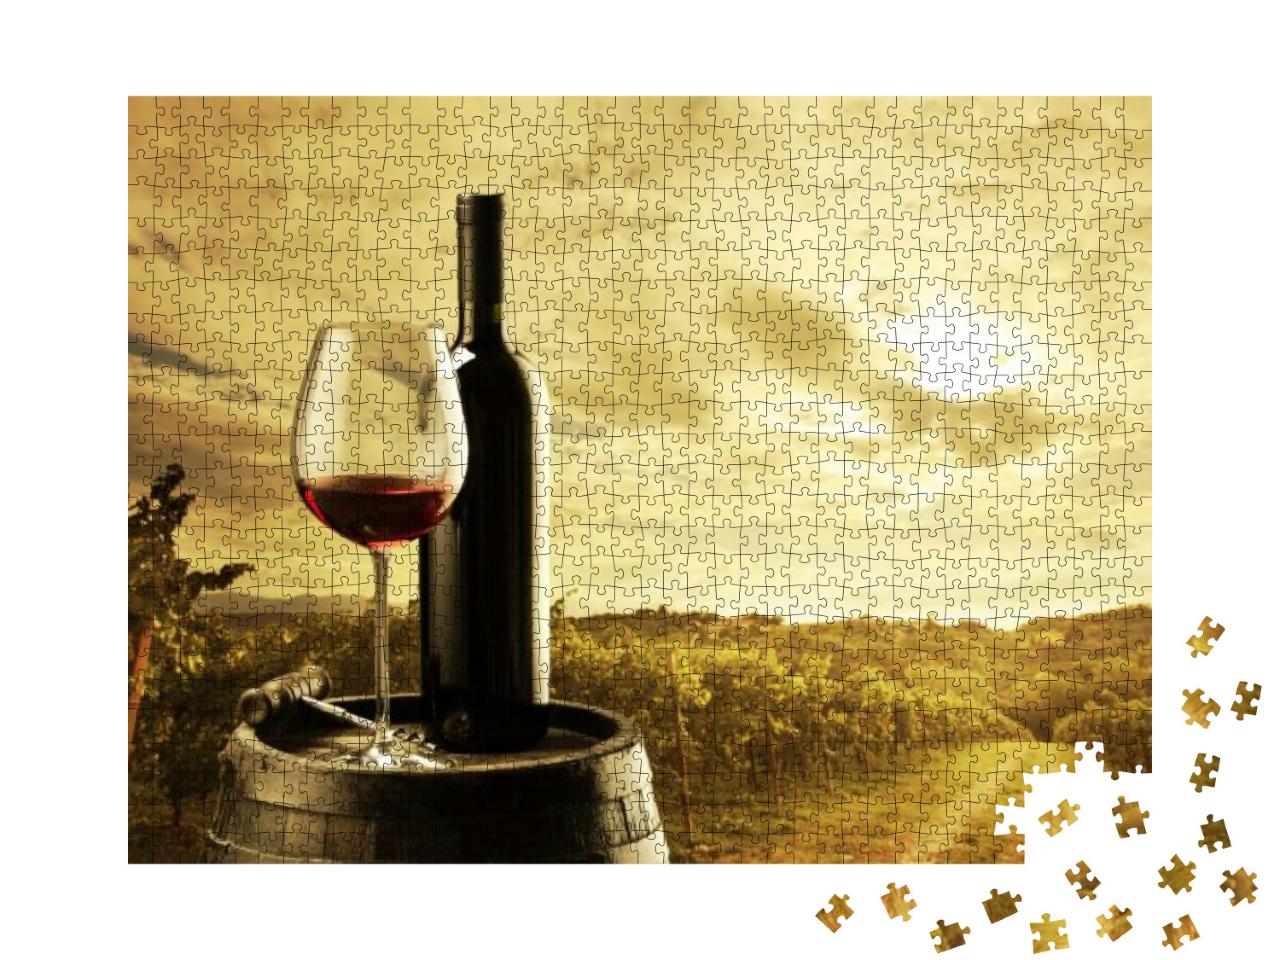 Red Wine Bottle & Wine Glass on Wooden Barrel... Jigsaw Puzzle with 1000 pieces